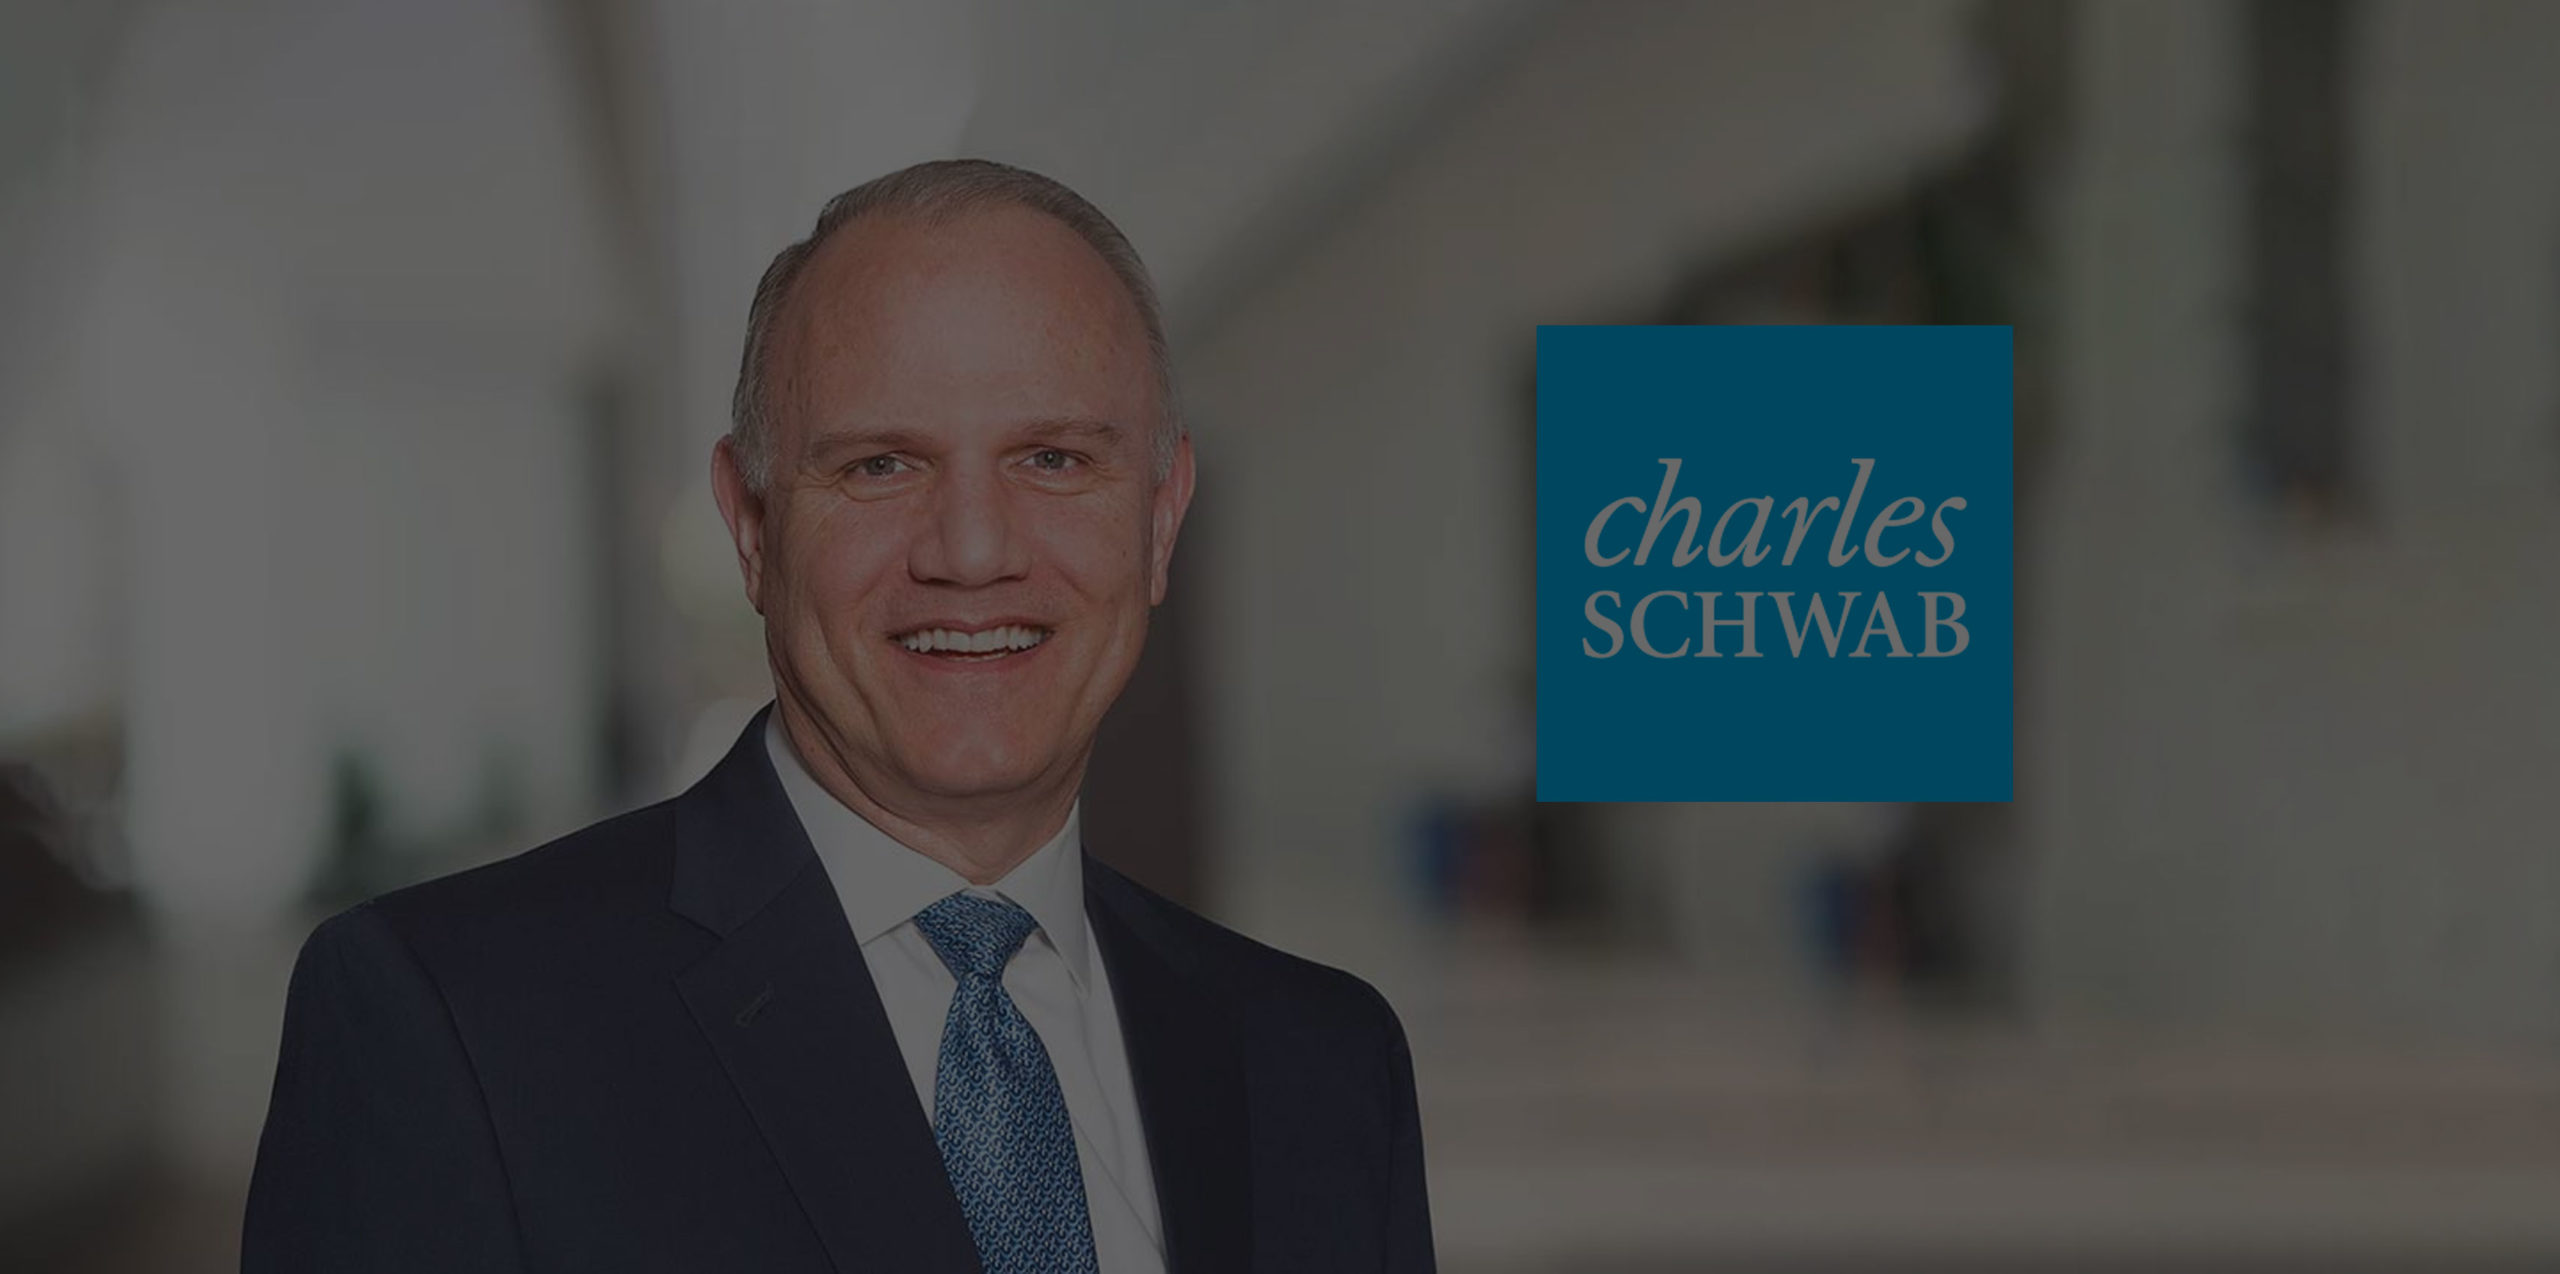 An Interview with Joe Martinetto, the COO of Charles Schwab